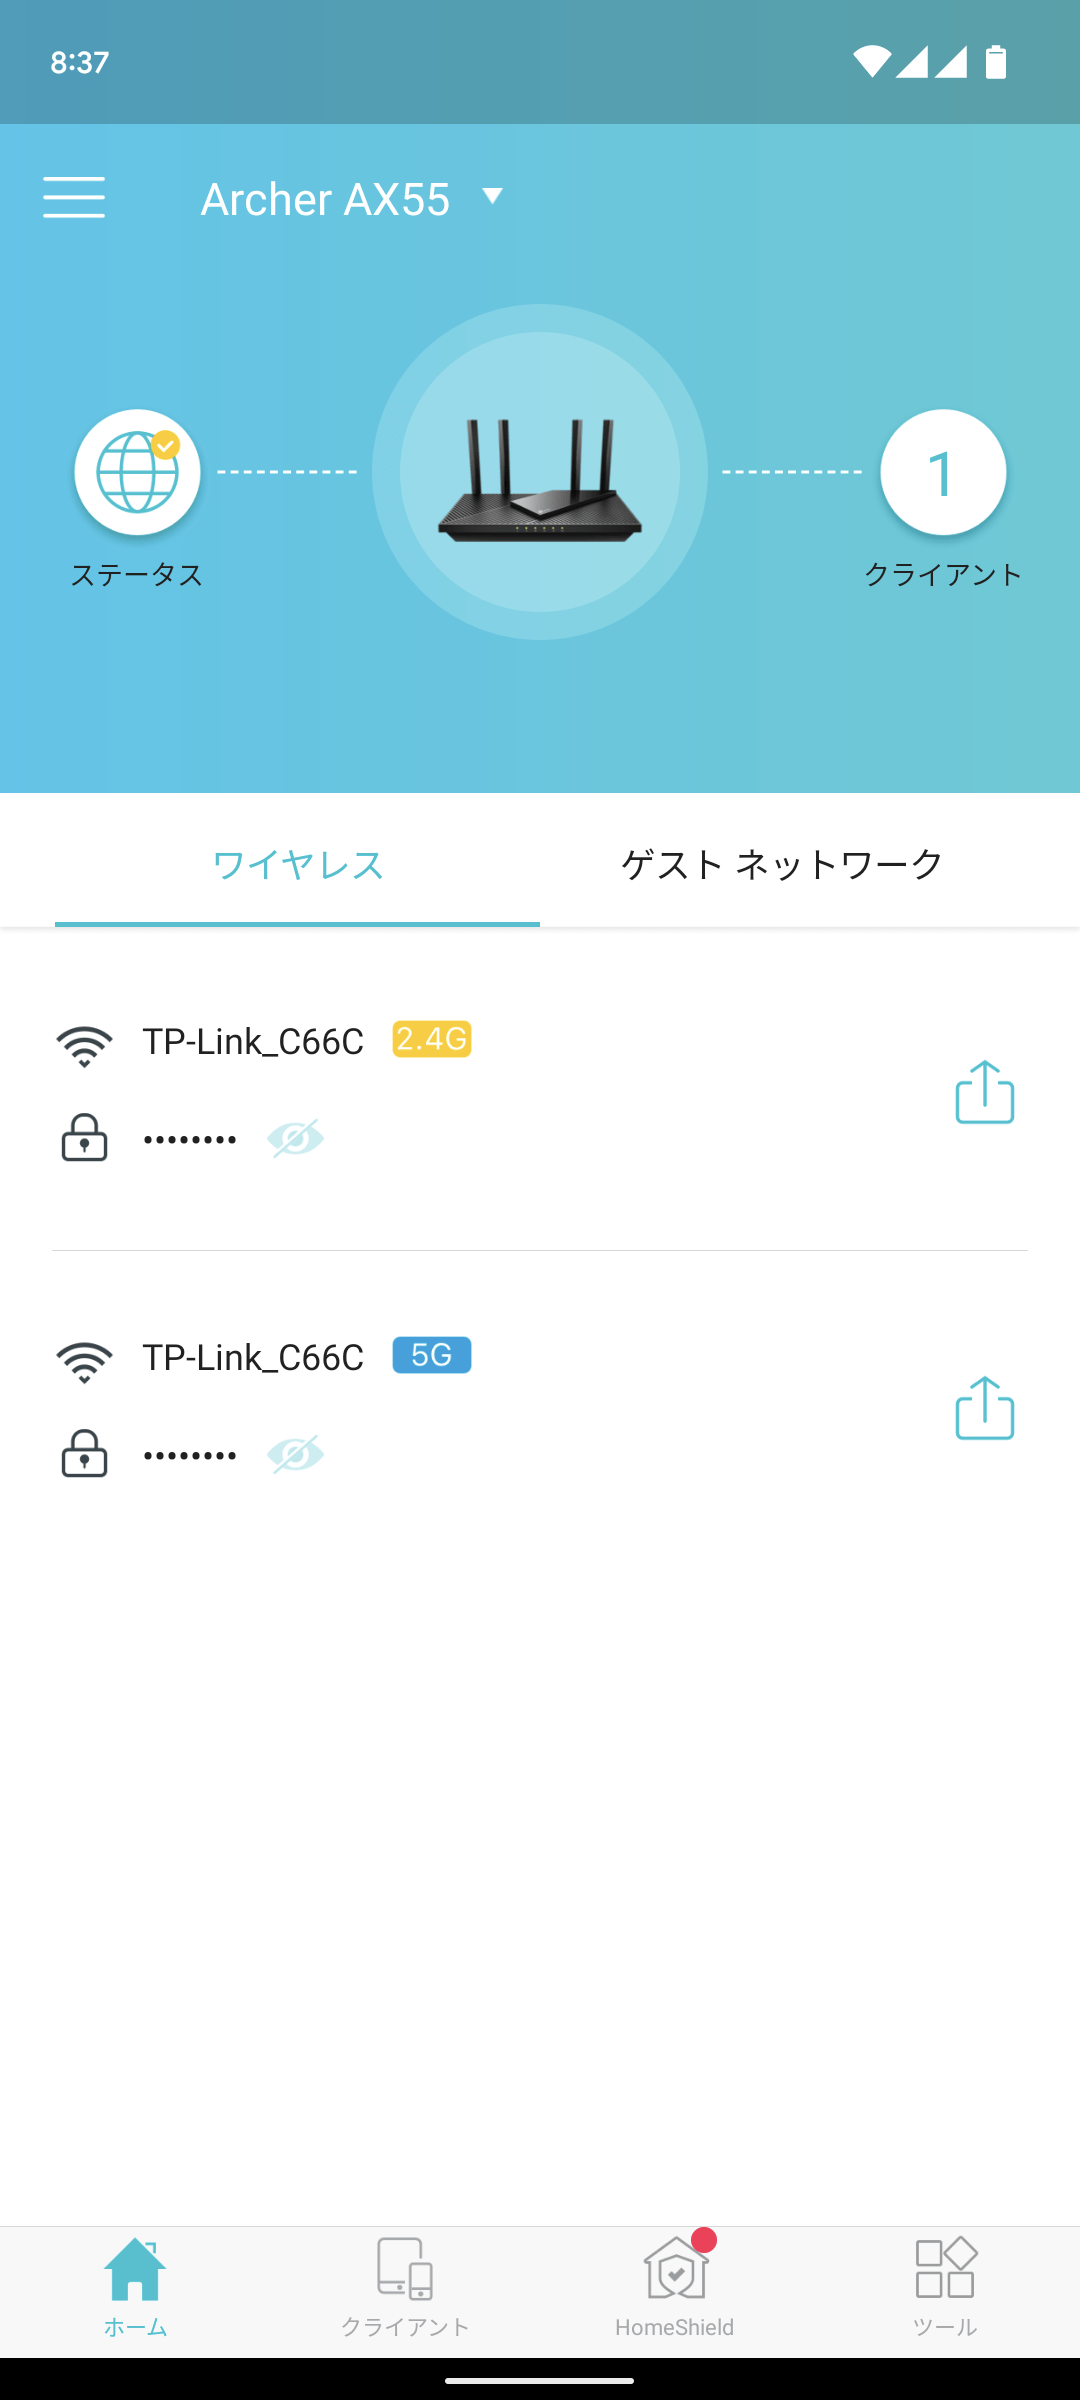 TP-Link Archer AX55 Tetherアプリ 認識された様子